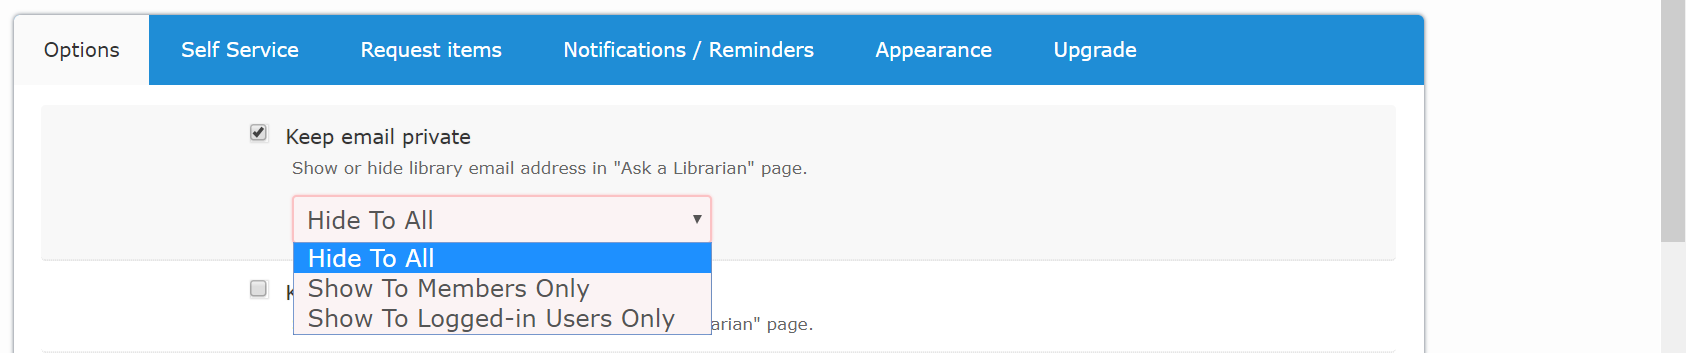 Library preference option form